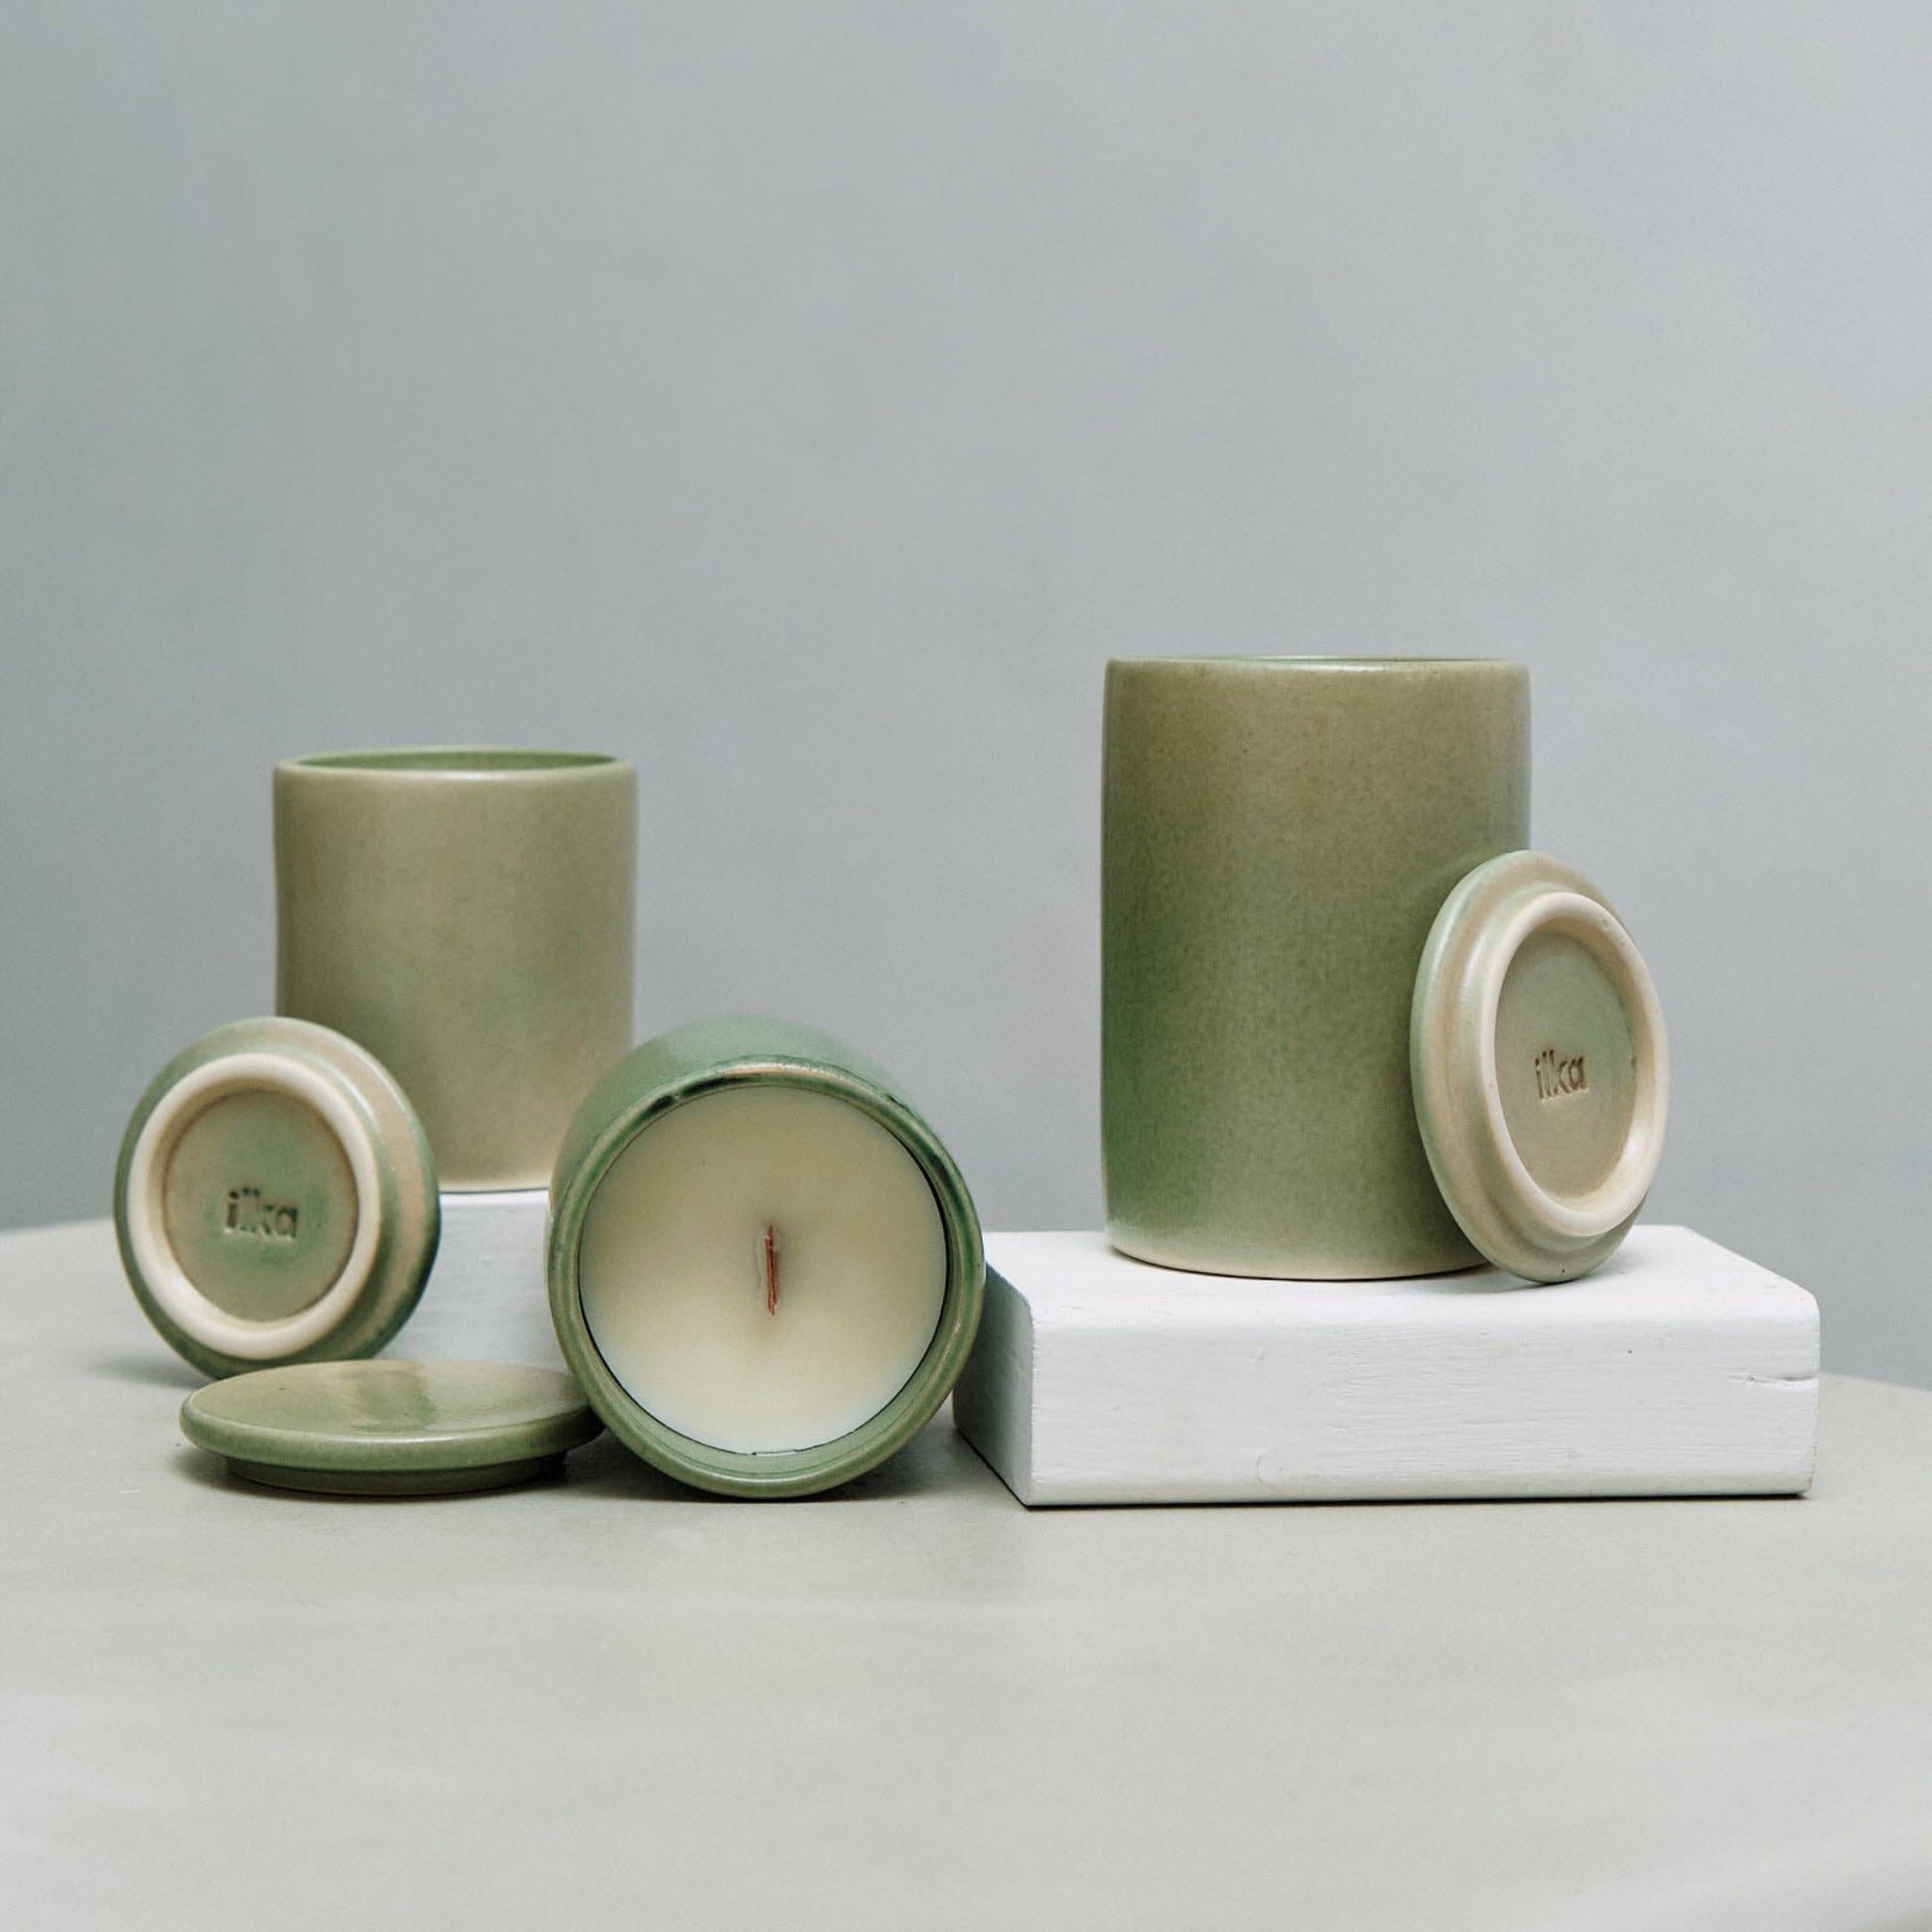 Ilka Candles : Gift Ideas